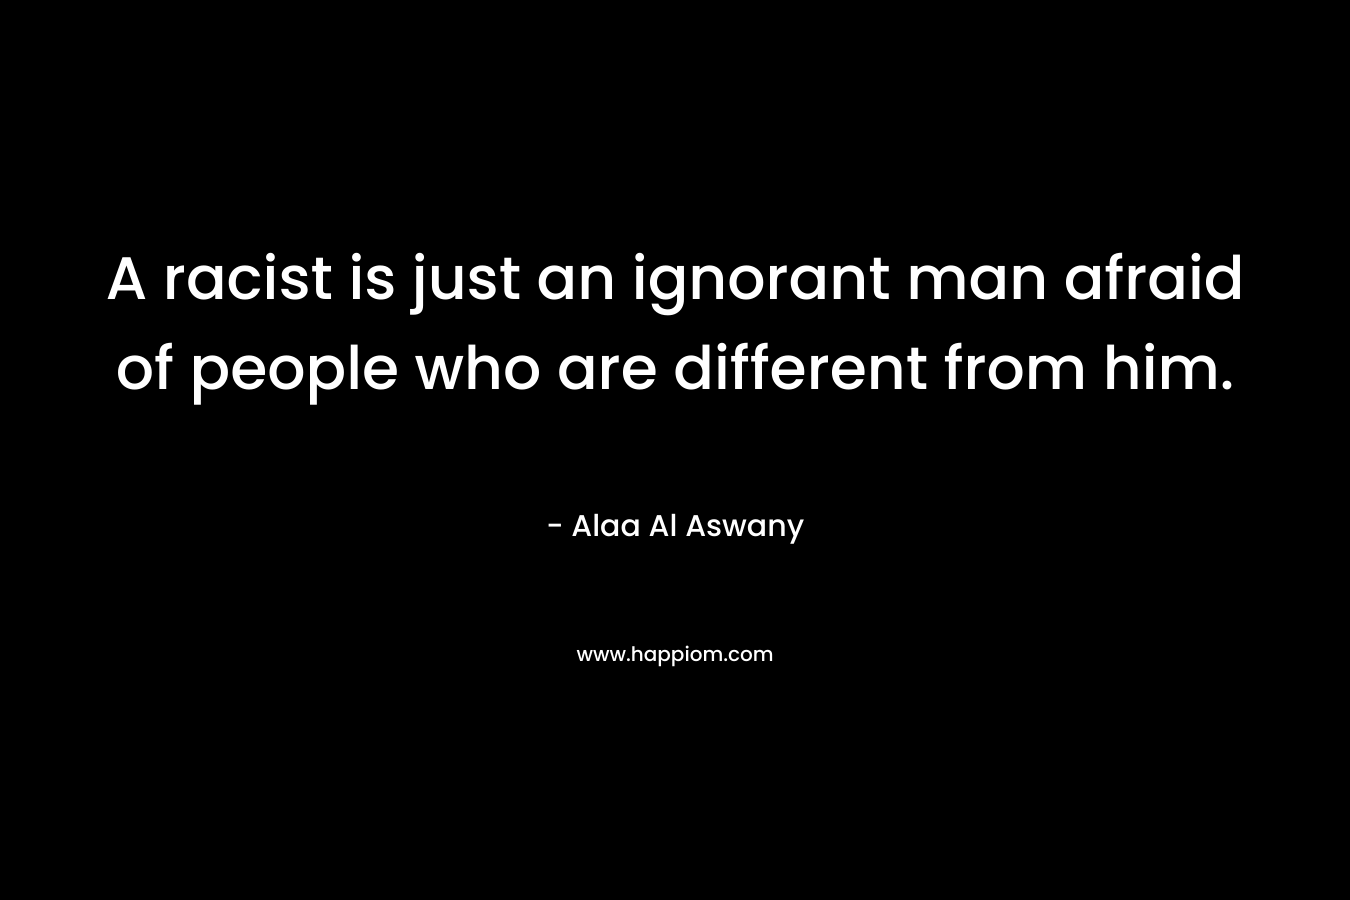 A racist is just an ignorant man afraid of people who are different from him.